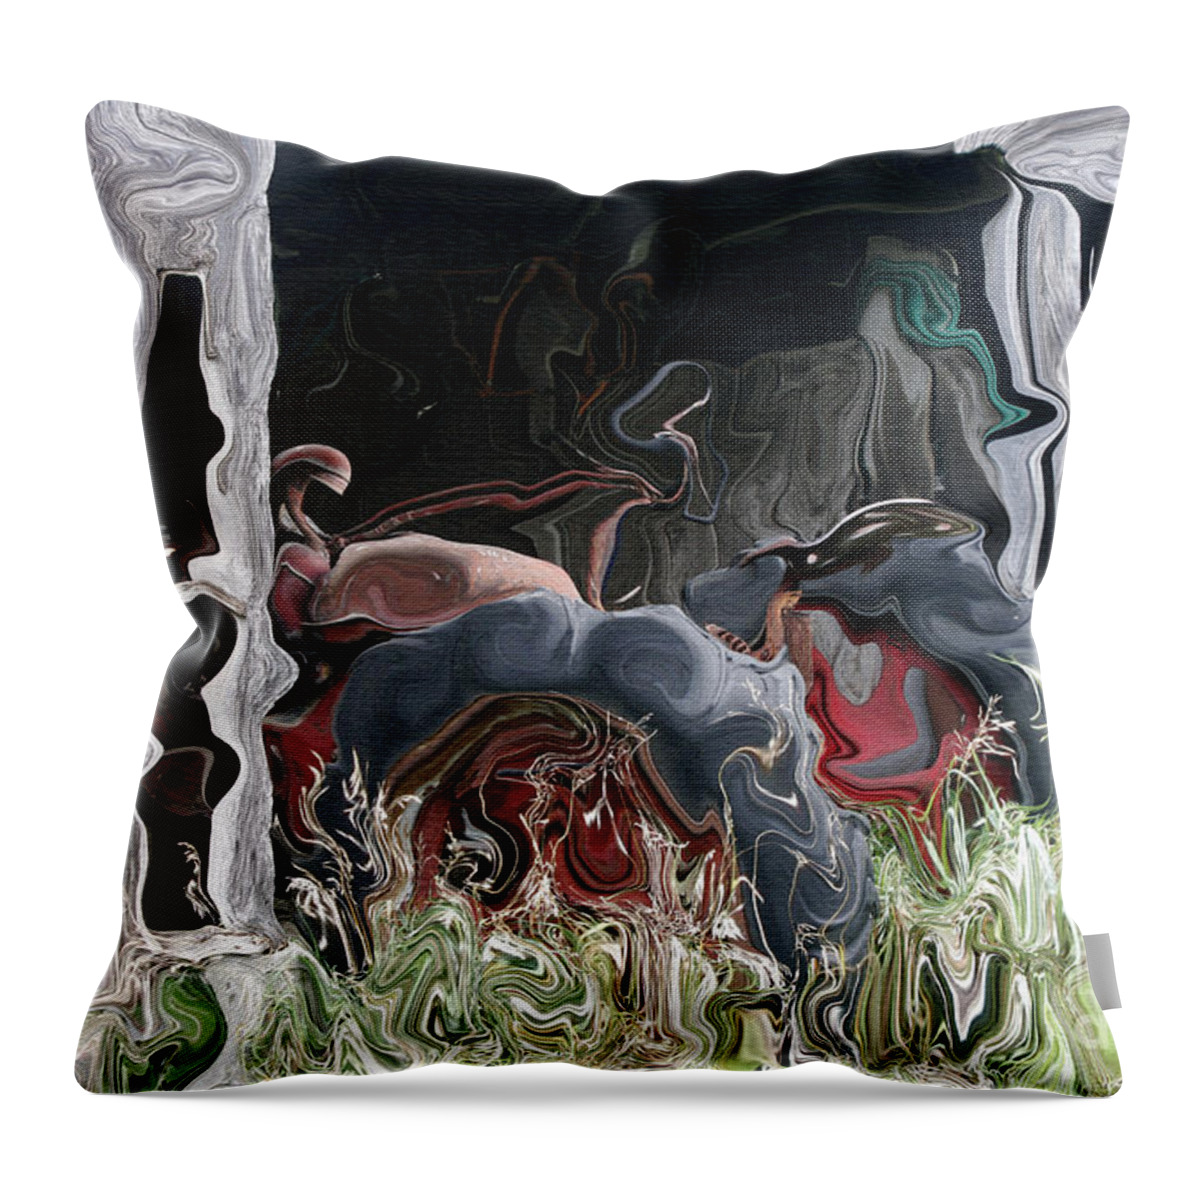 Tractor Throw Pillow featuring the photograph Abstract Tractor by Rick Rauzi